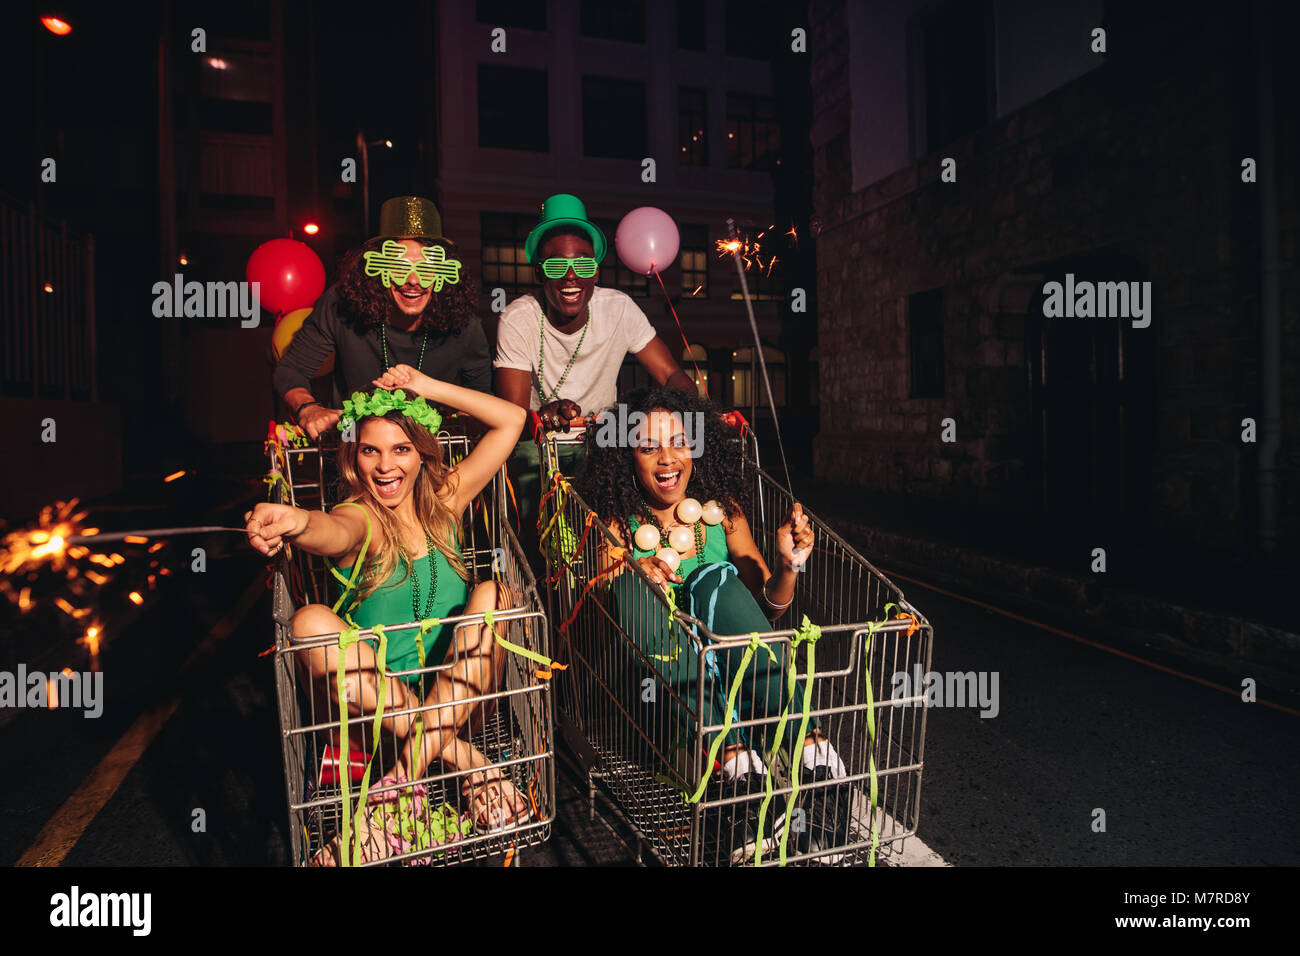 Men and women on shopping trolleys at night with sparklers on city street. Group of friends having fun on St.Patrick's day celebration at night. Stock Photo